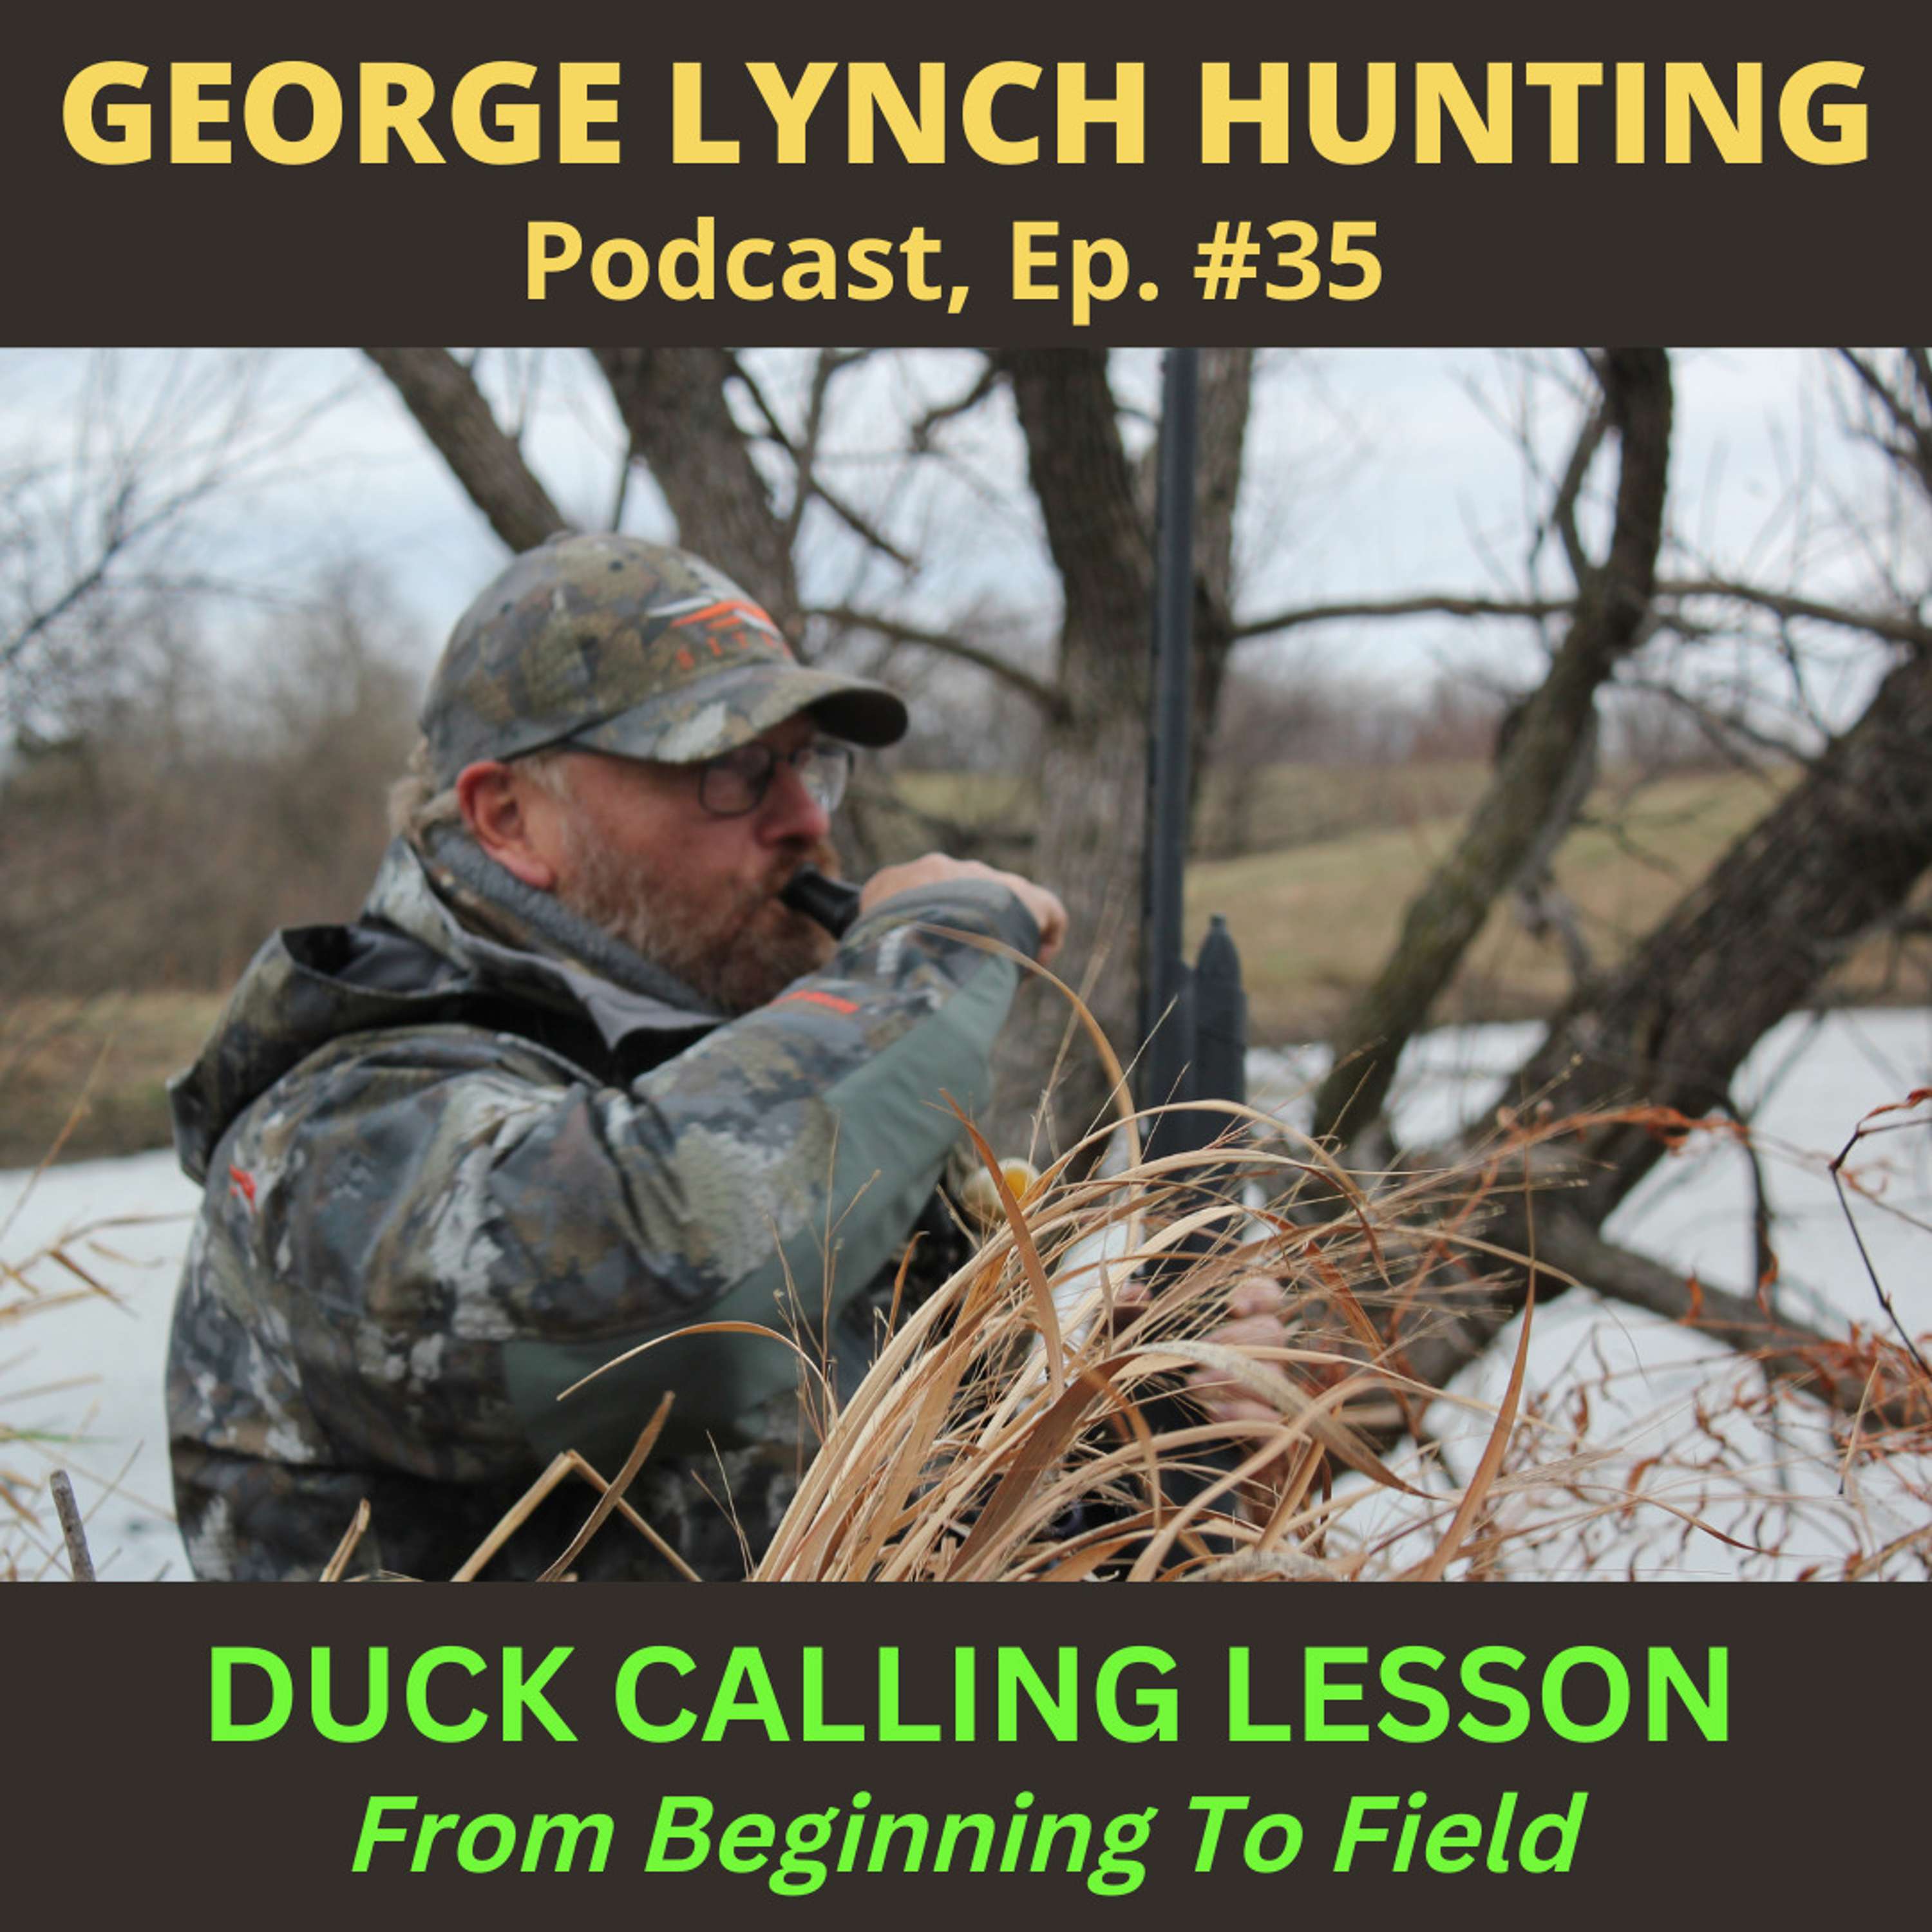 DUCK CALLING LESSON: From Beginning to Field by George Lynch of Legendary Gear